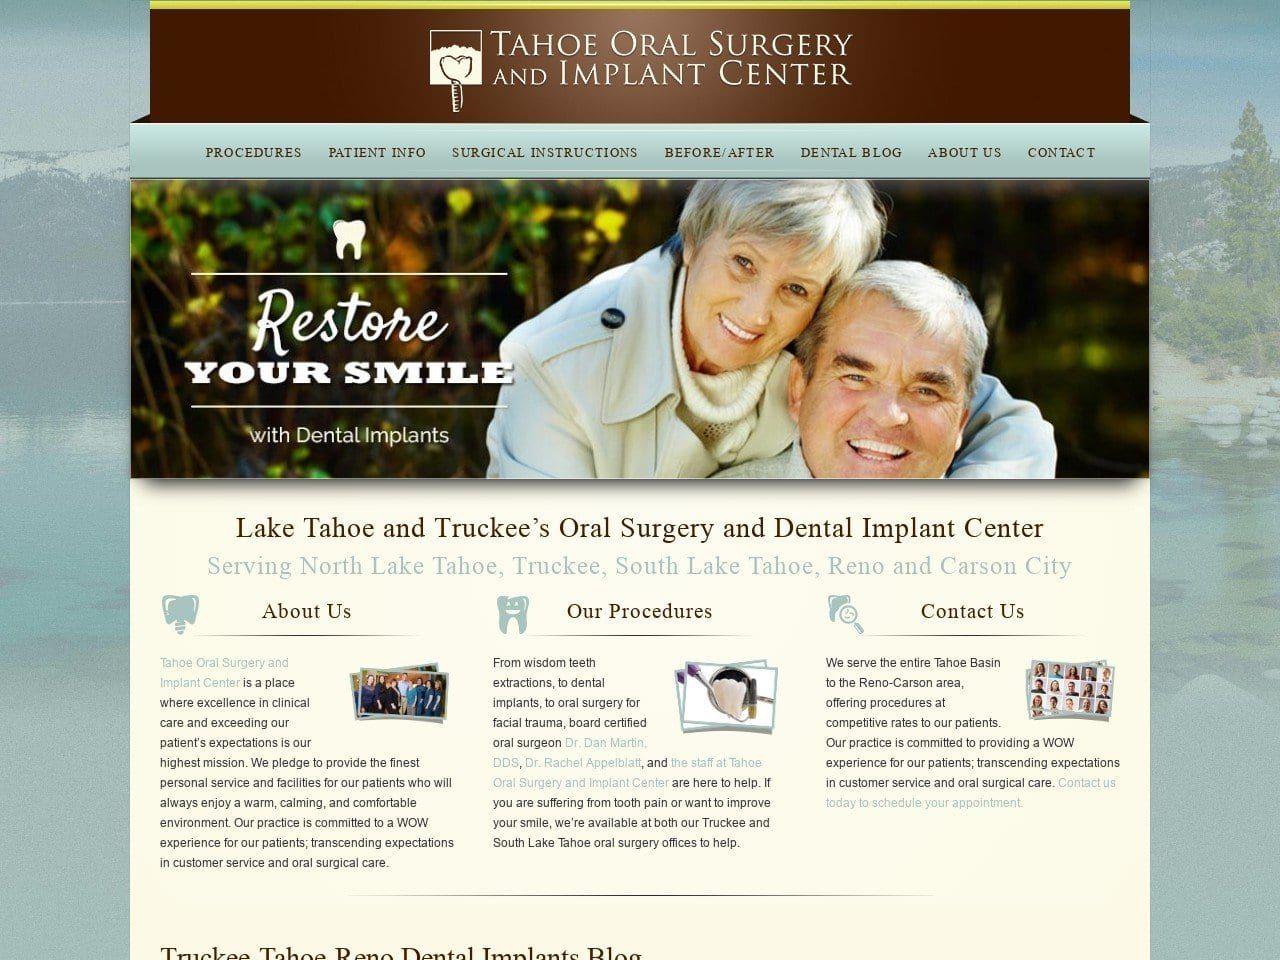 Tahoe Oral Surgery and Implant Center Website Screenshot from tahoeoralsurgery.com